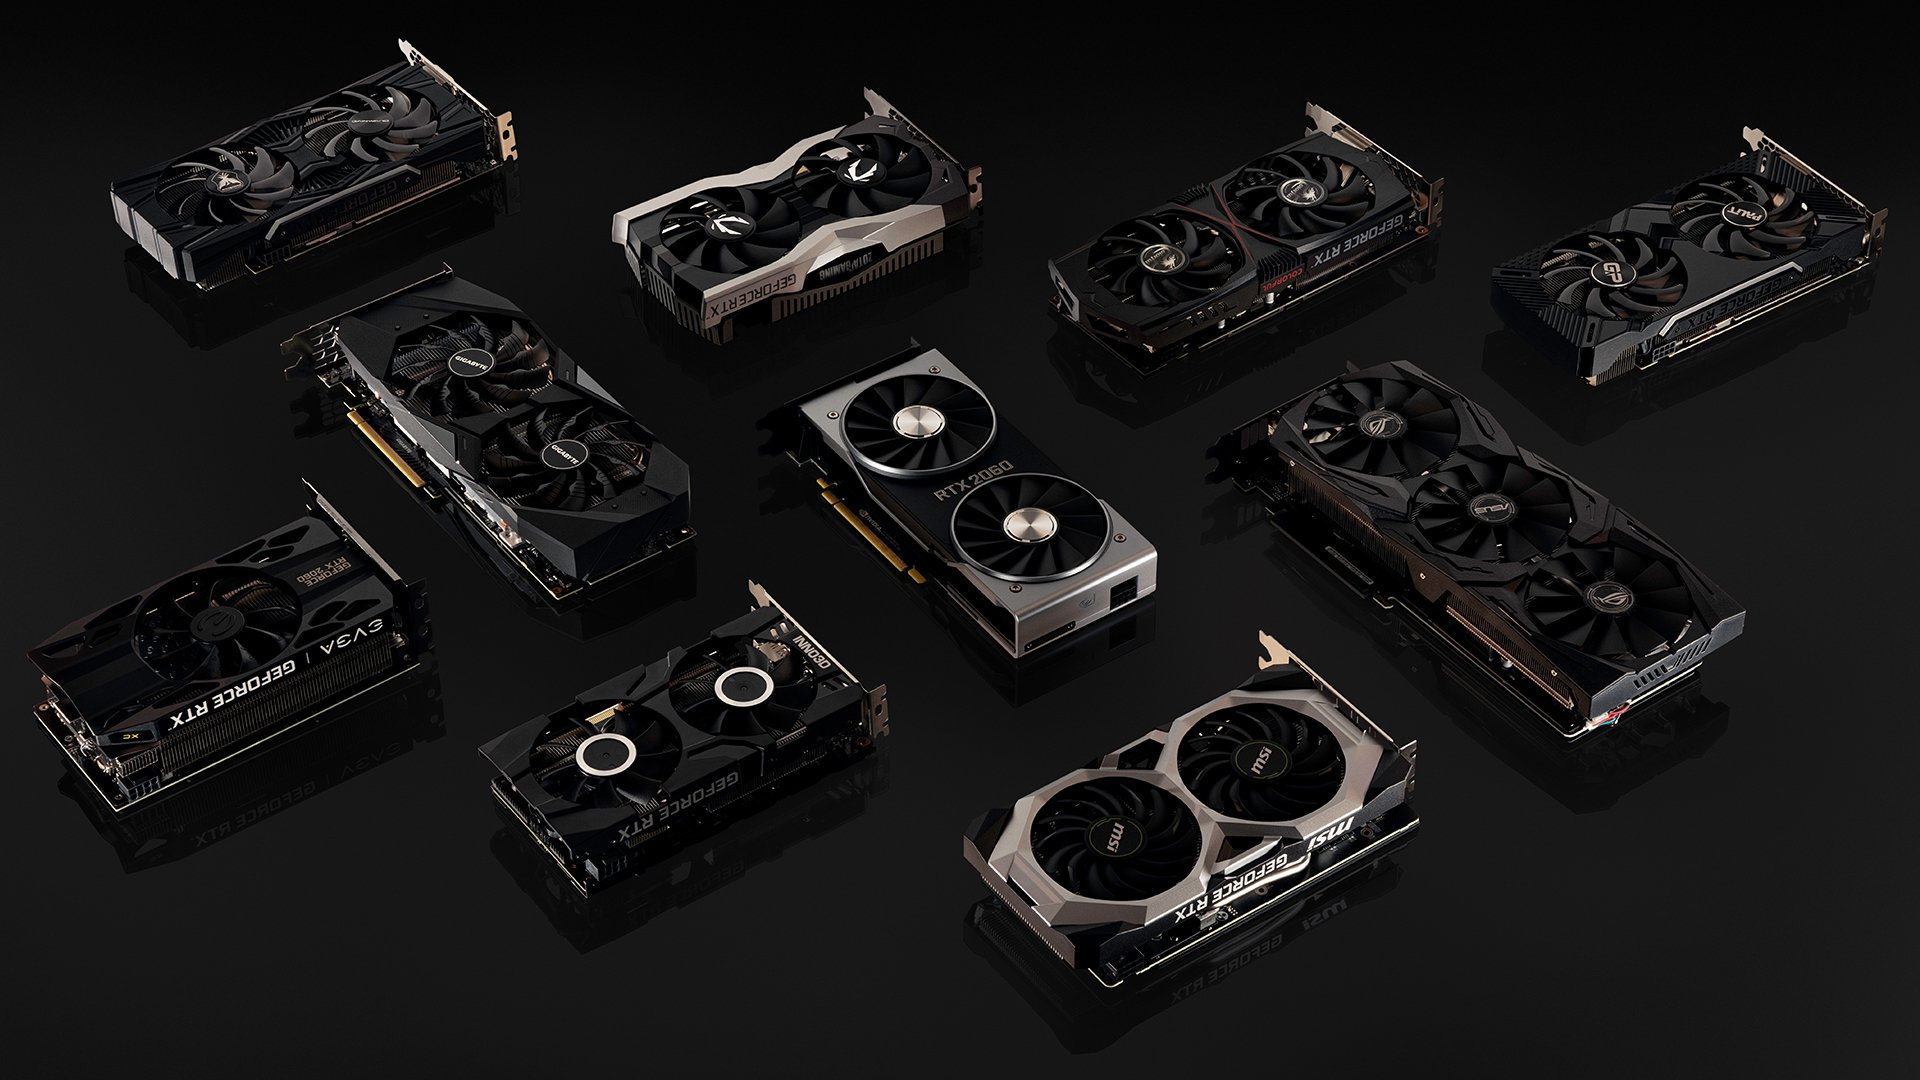 NVIDIA unveils GeForce RTX 2060, coming January 15 for $350